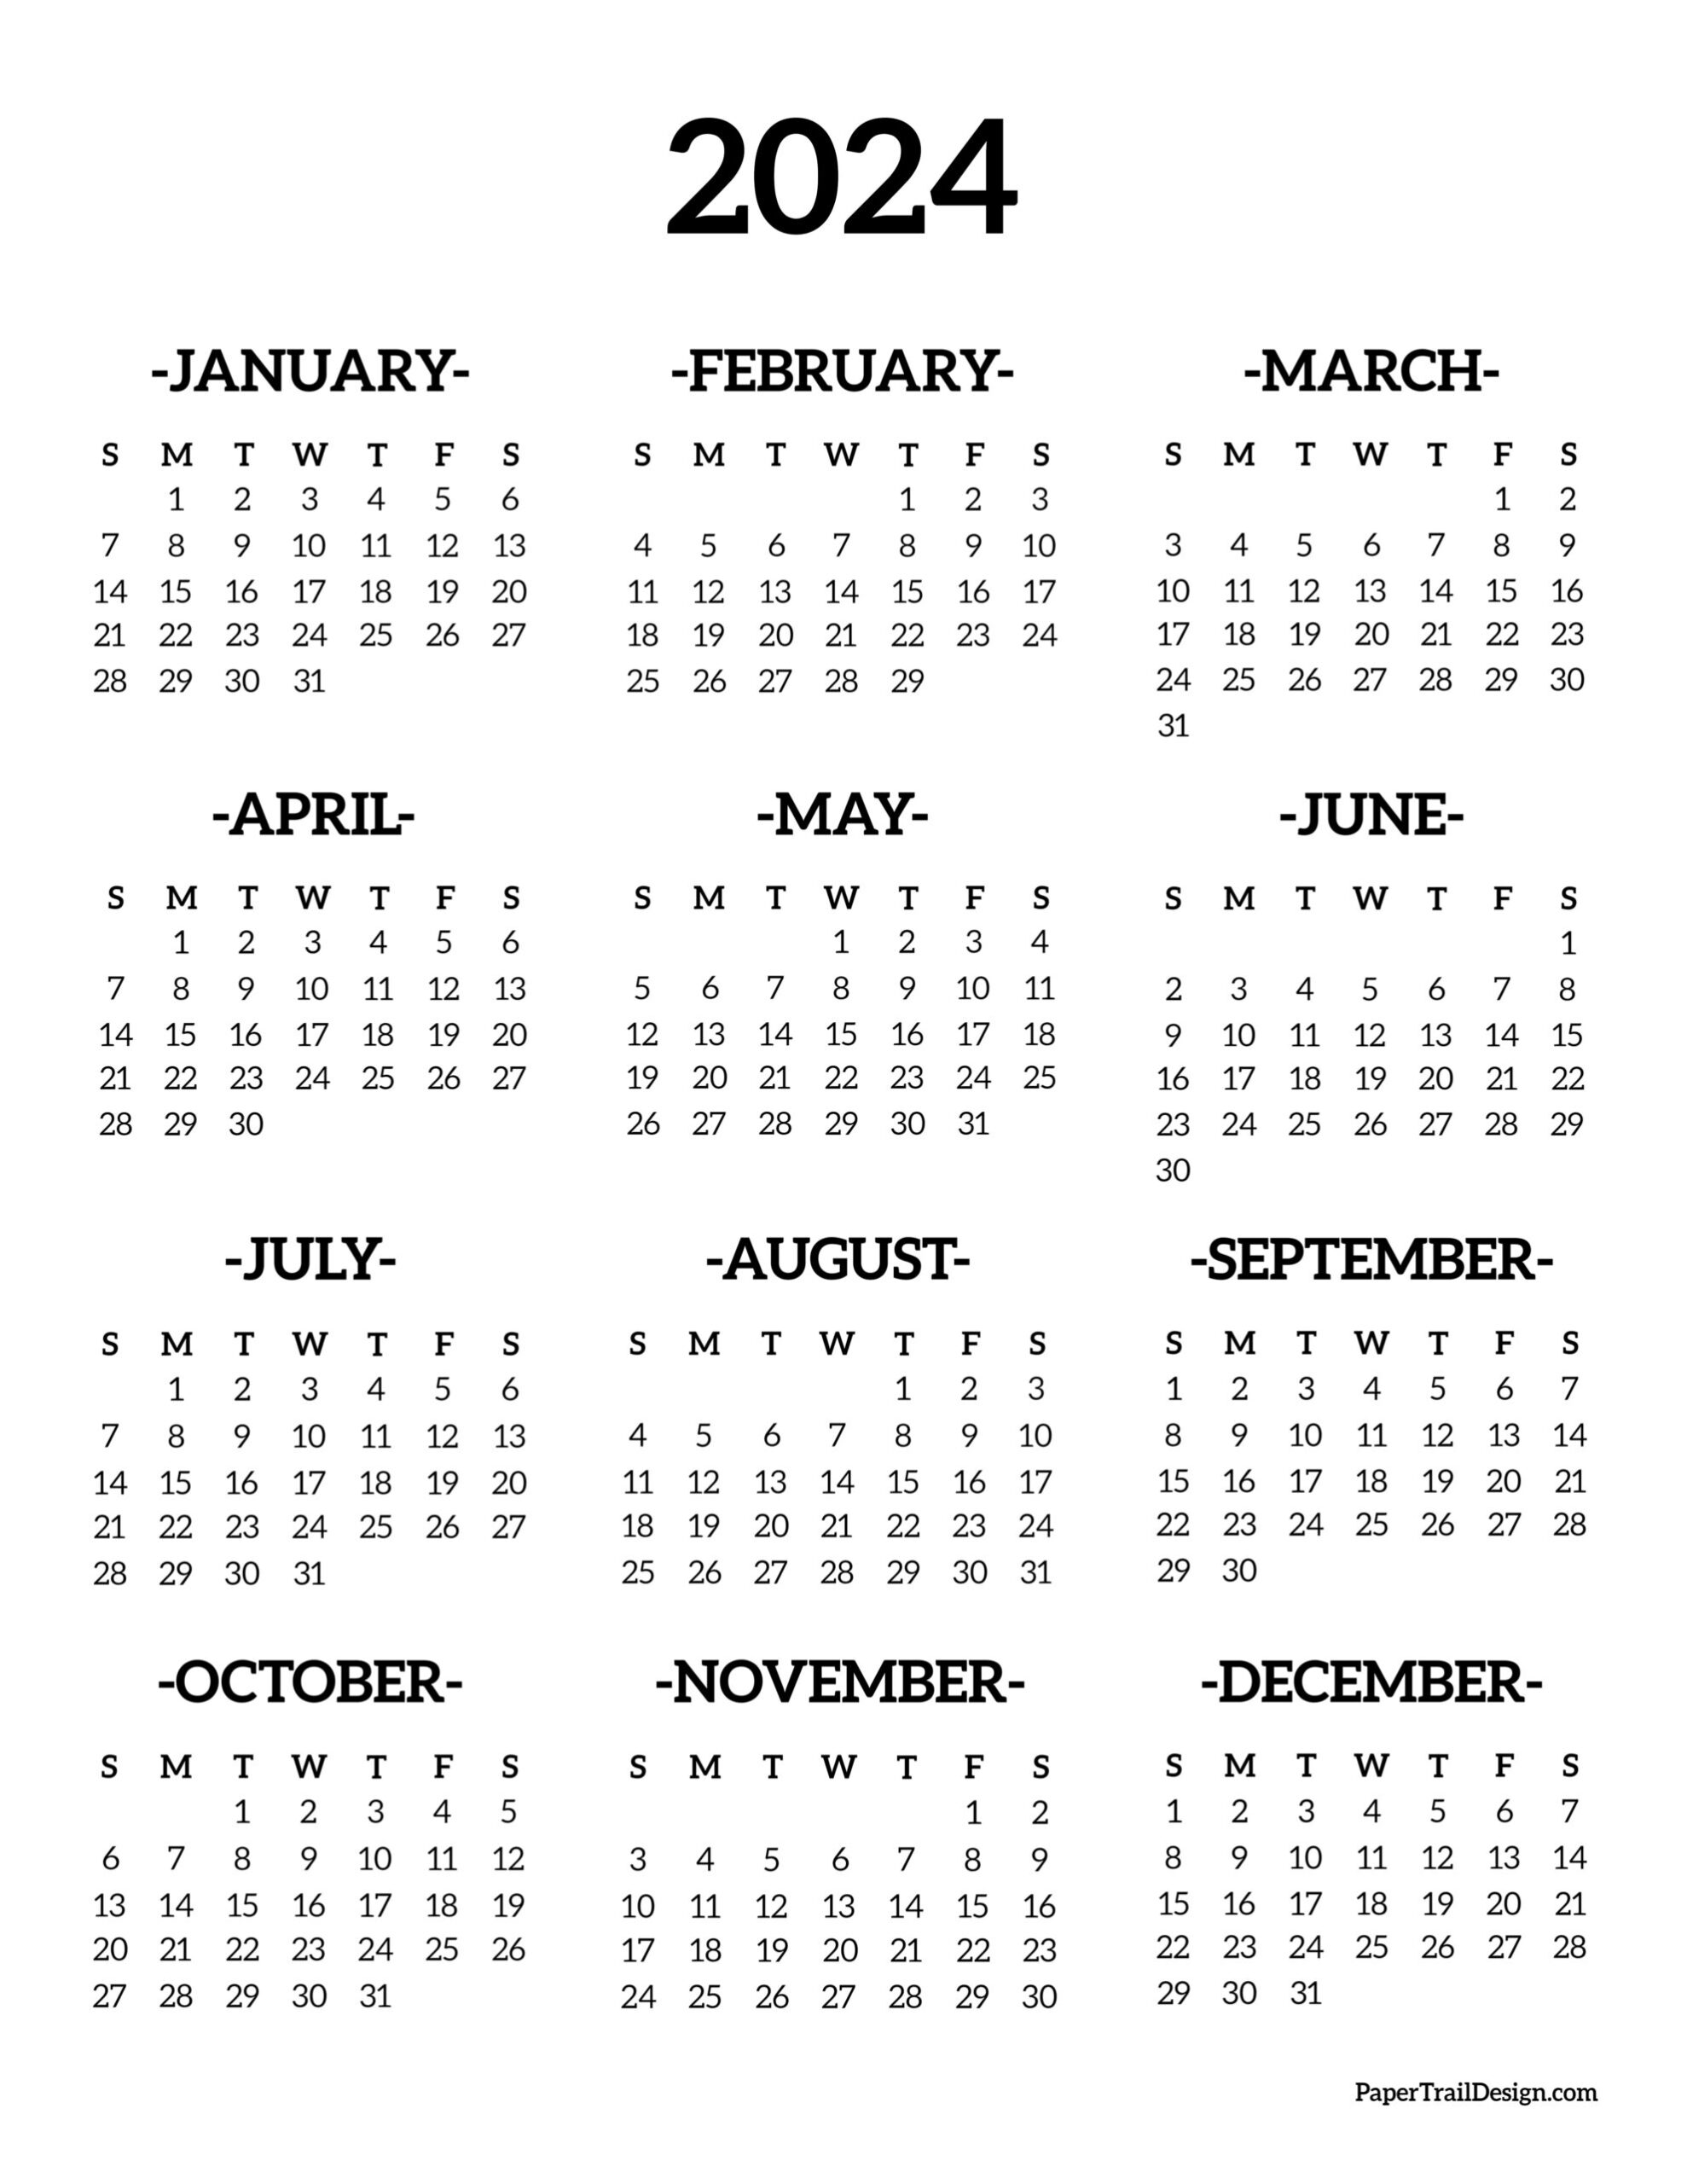 Calendar 2024 Printable One Page - Paper Trail Design for Free Printable 12 Month Calendar On One Page 2024